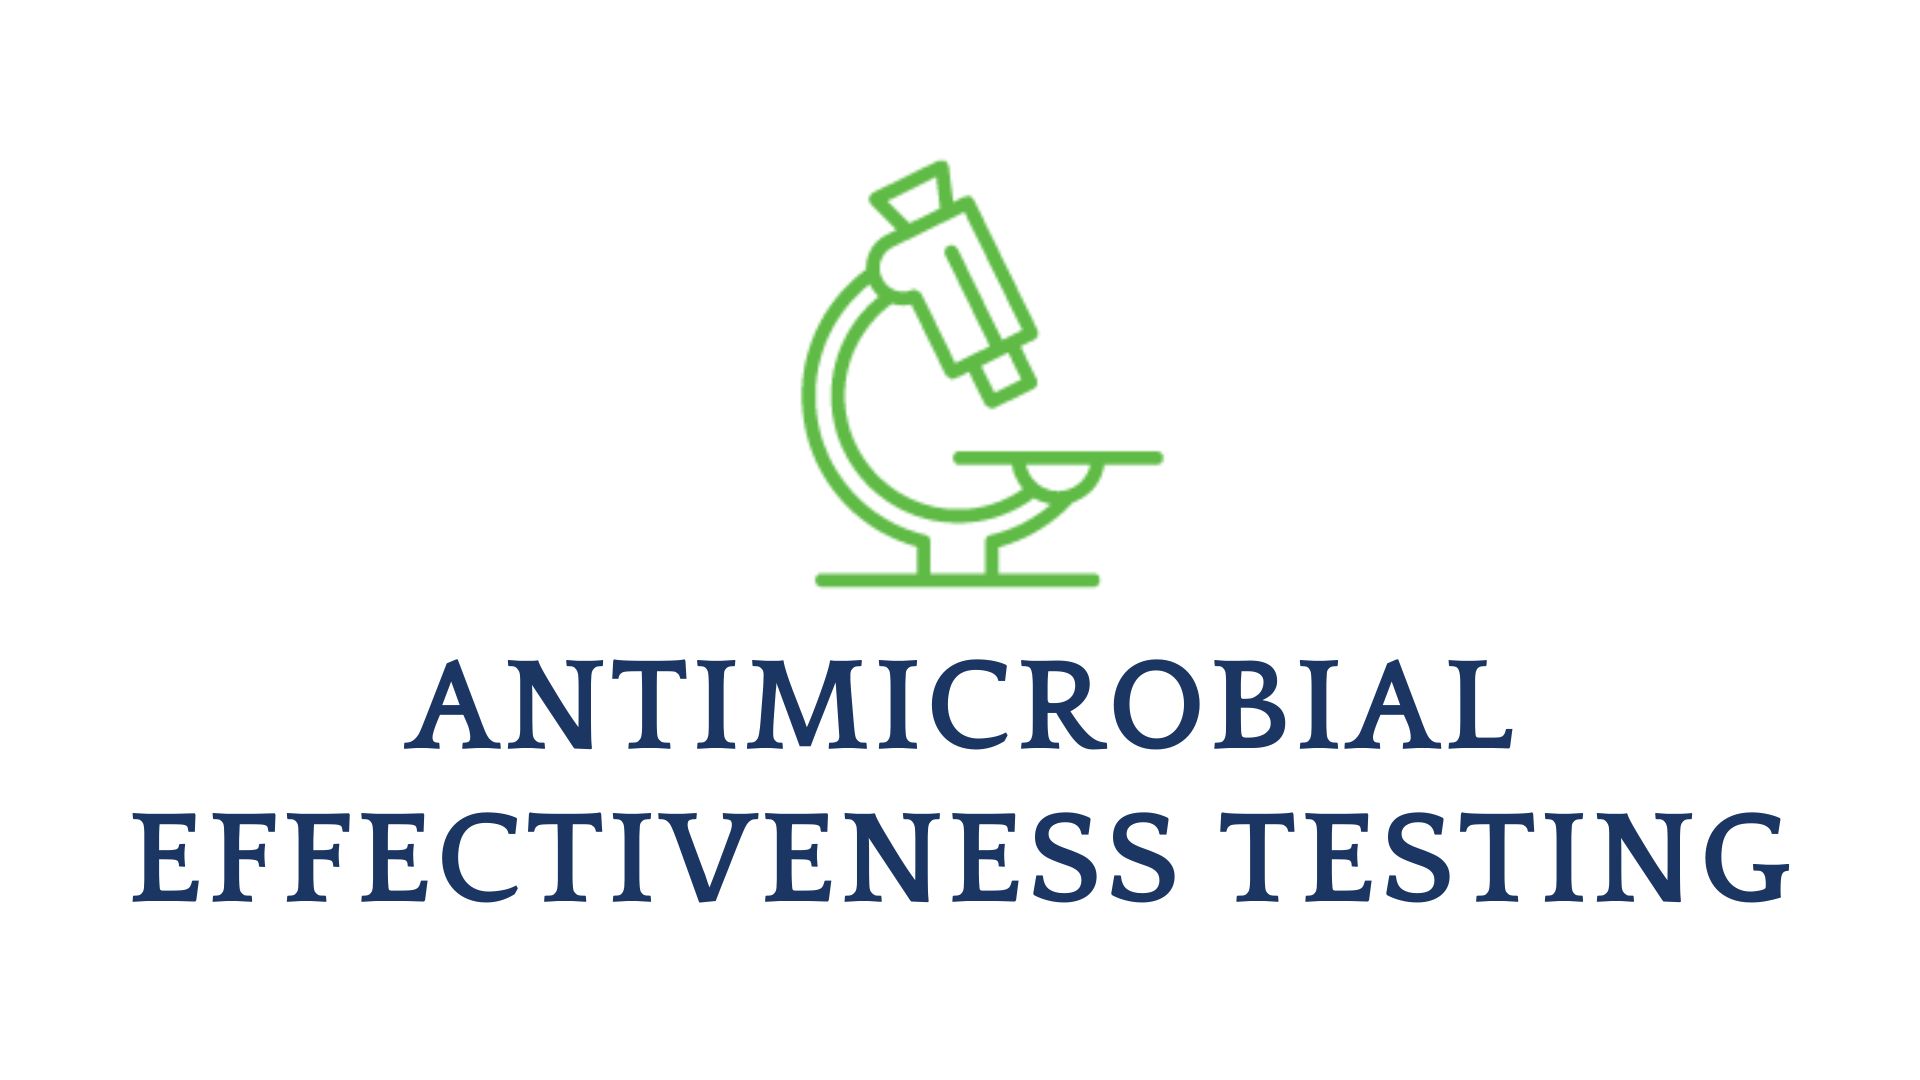 Antimicrobial effectiveness testing